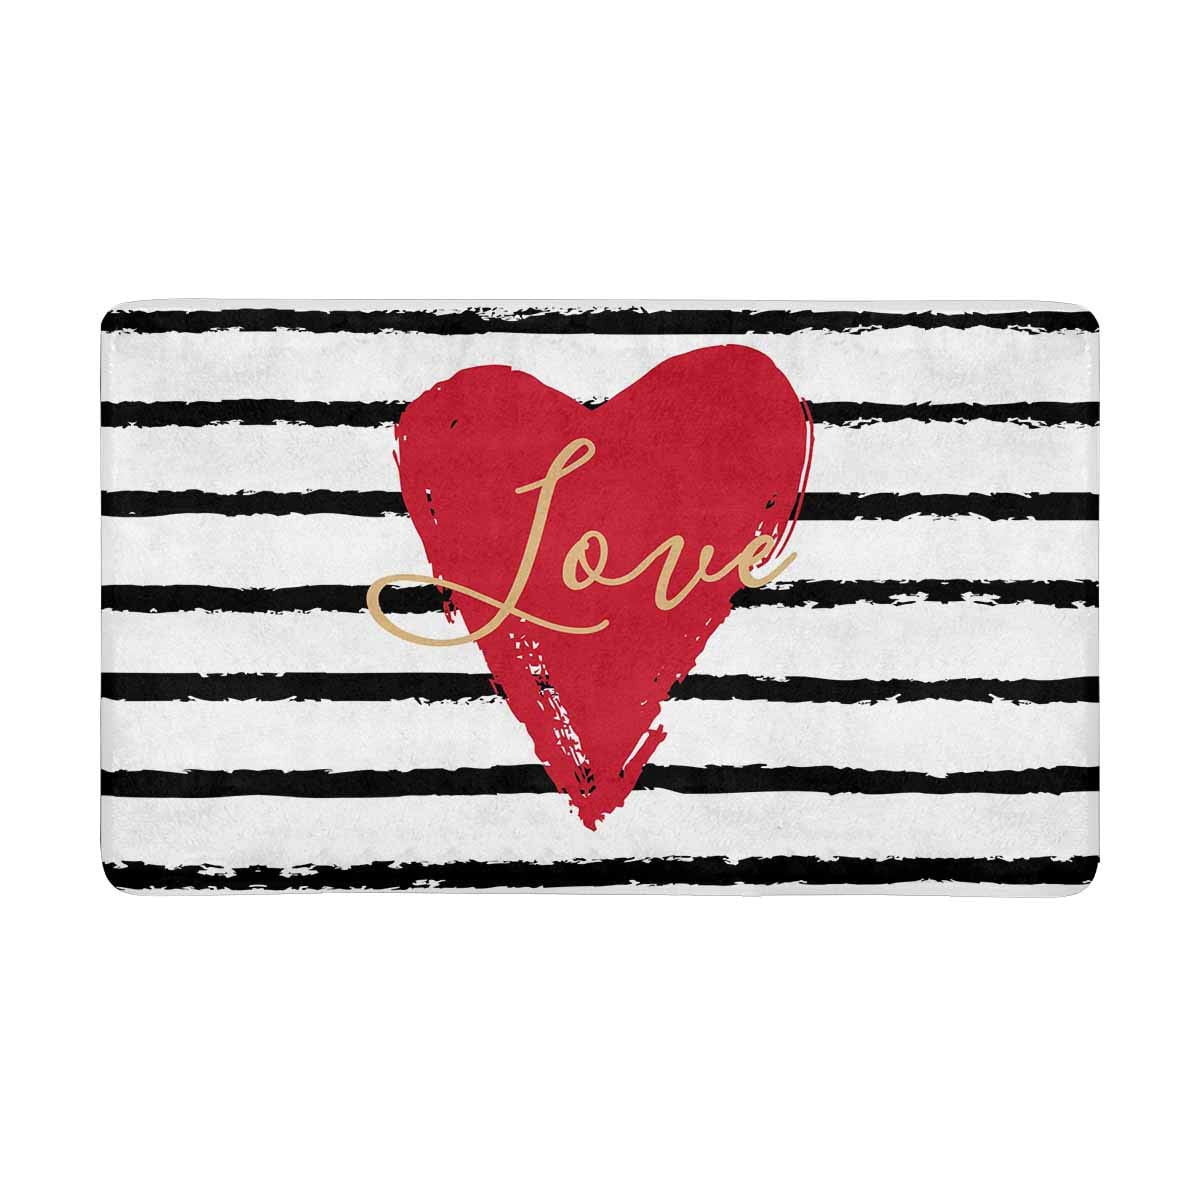 All You Need is LOVE Hearts Stripes Valentine Area Rugs Carpet Bedroom Floor Mat 